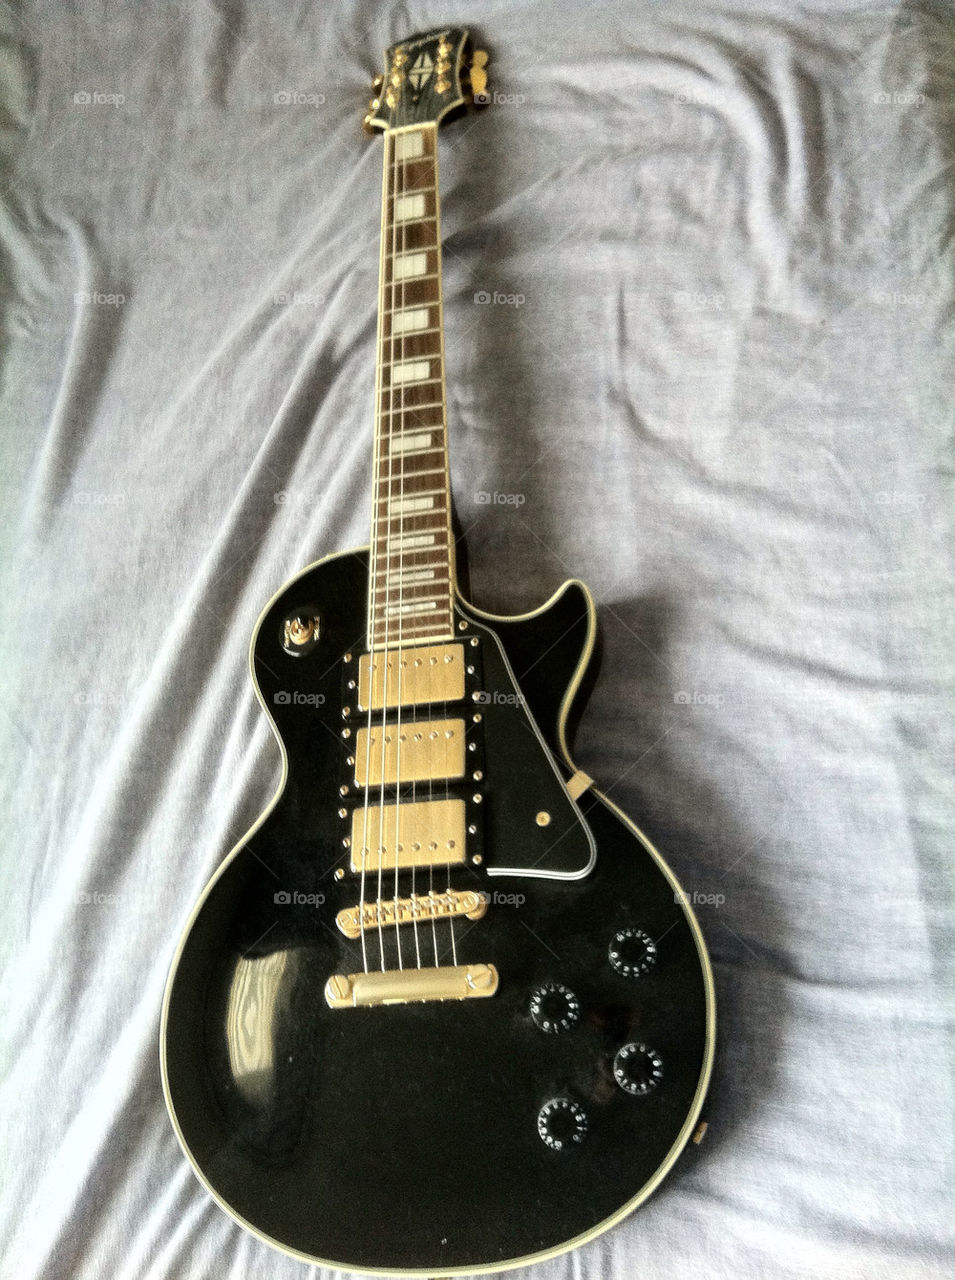 black gold beauty guitar by niall